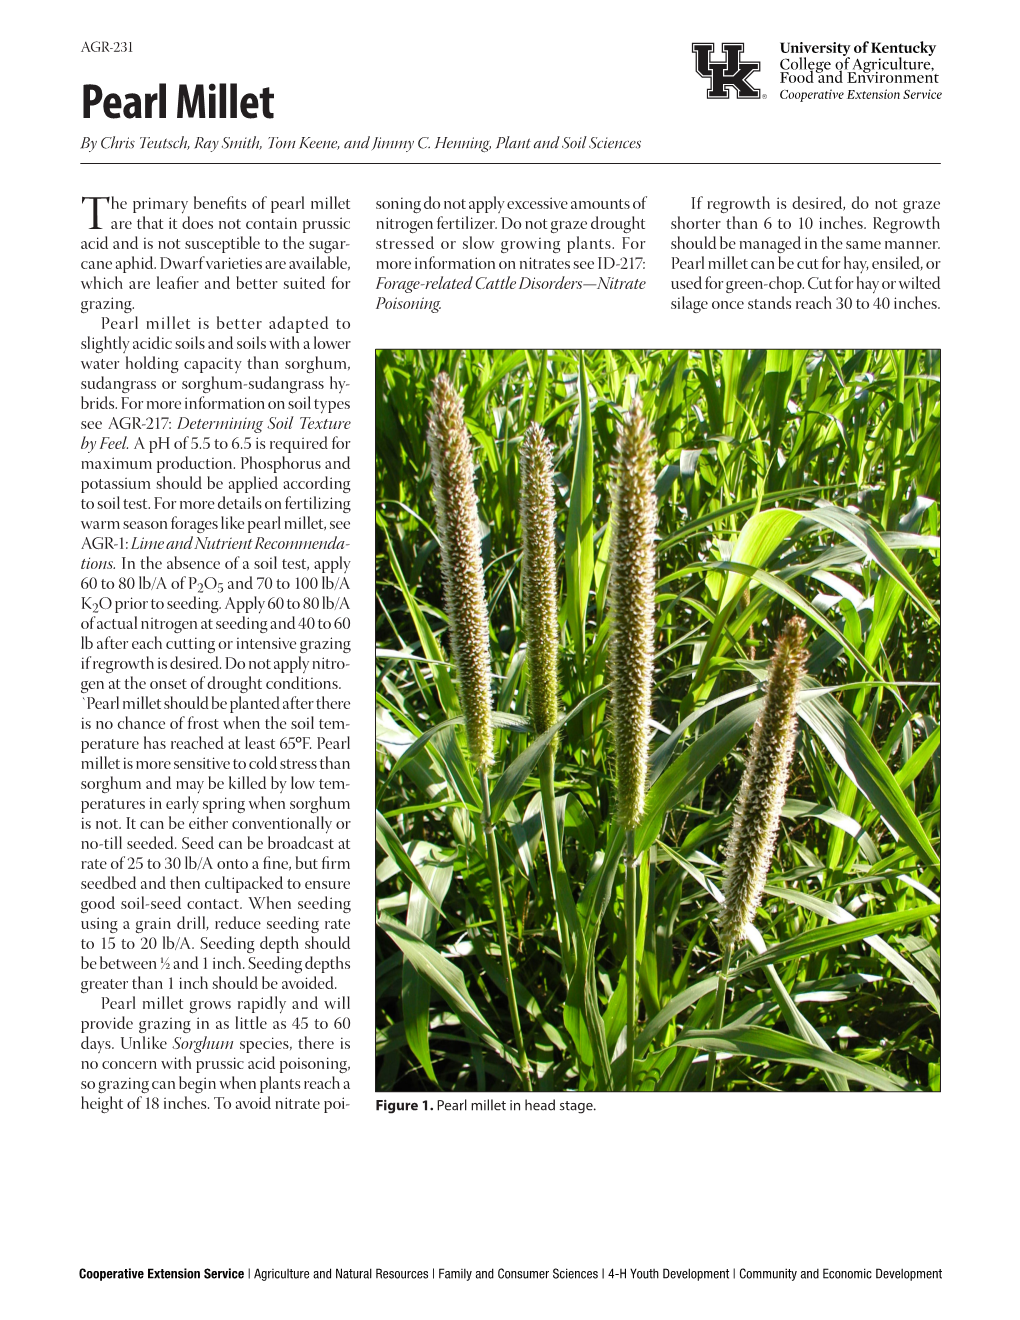 Pearl Millet Cooperative Extension Service by Chris Teutsch, Ray Smith, Tom Keene, and Jimmy C